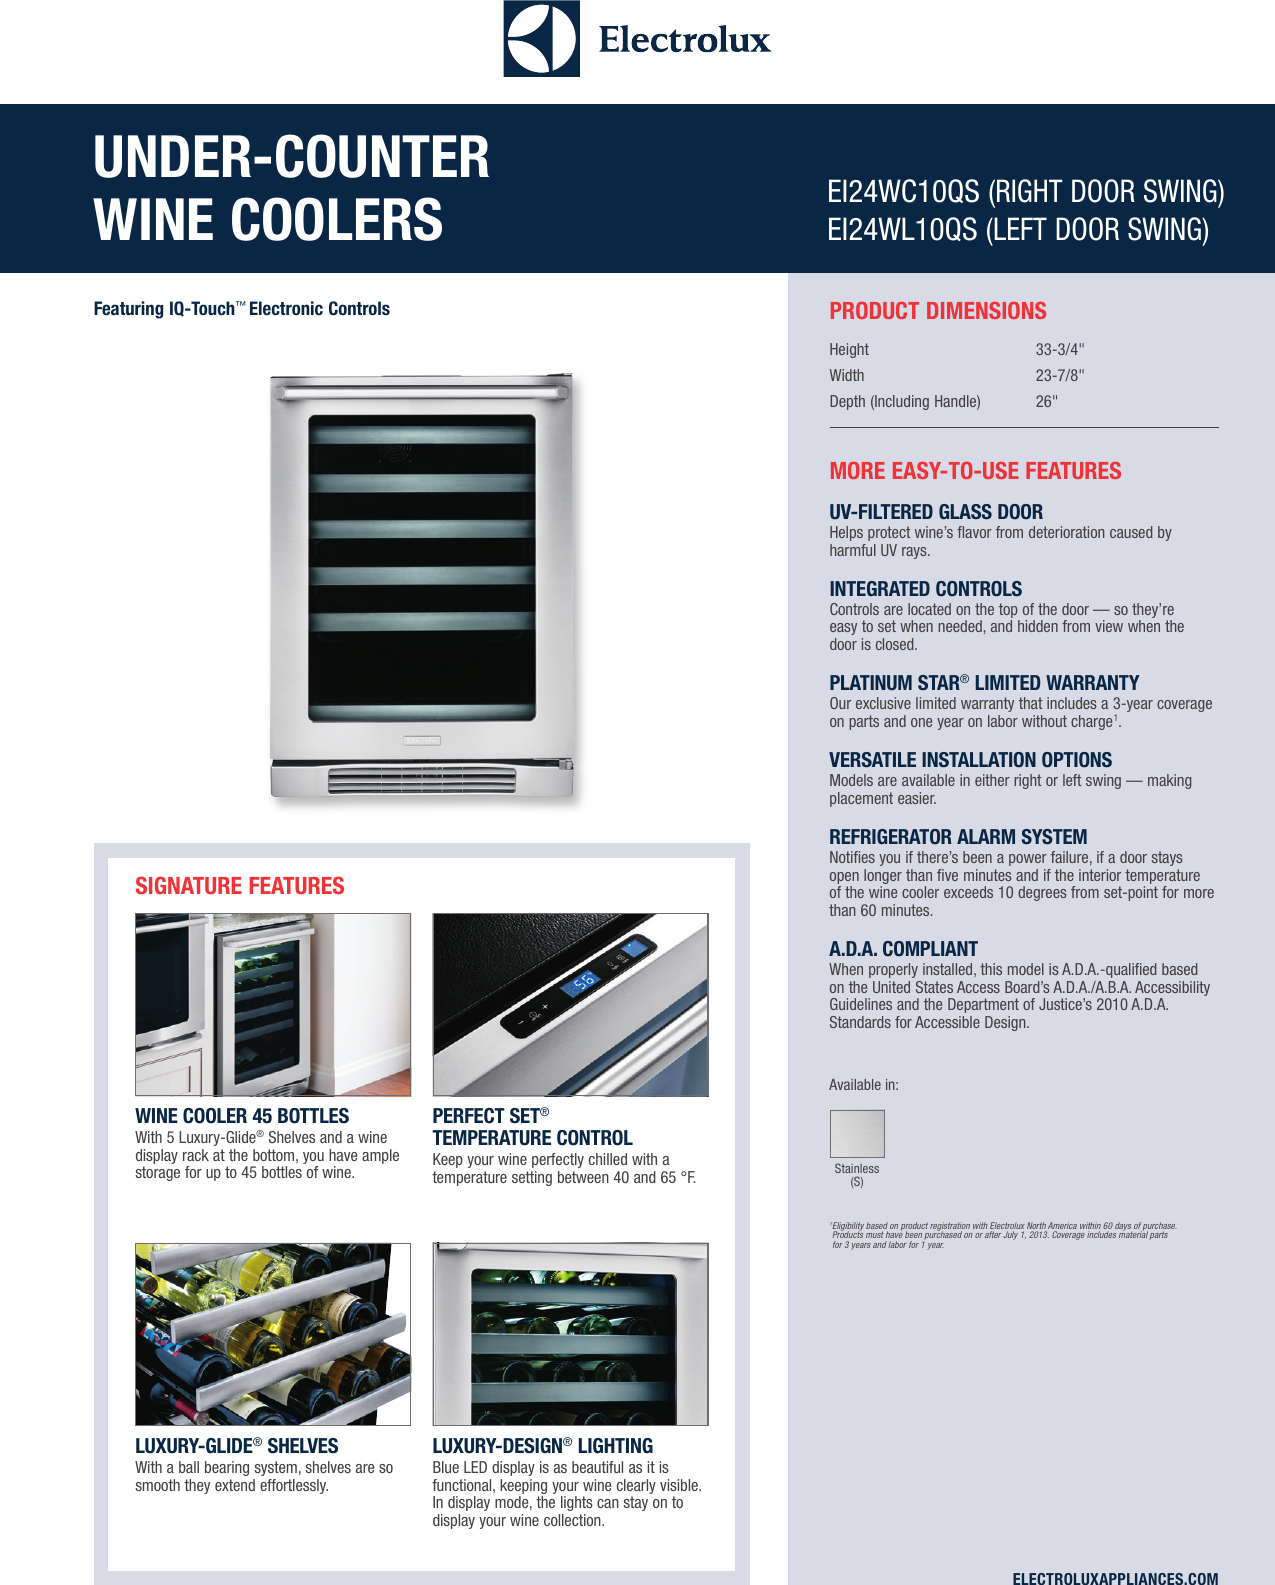 Page 1 of 6 - Electrolux Electrolux-24-Under-Counter-Wine-Cooler-With-Right-Door-Swing-Ei24Wc10Qs-Product-Specifications-Sheet-  Electrolux-24-under-counter-wine-cooler-with-right-door-swing-ei24wc10qs-product-specifications-sheet